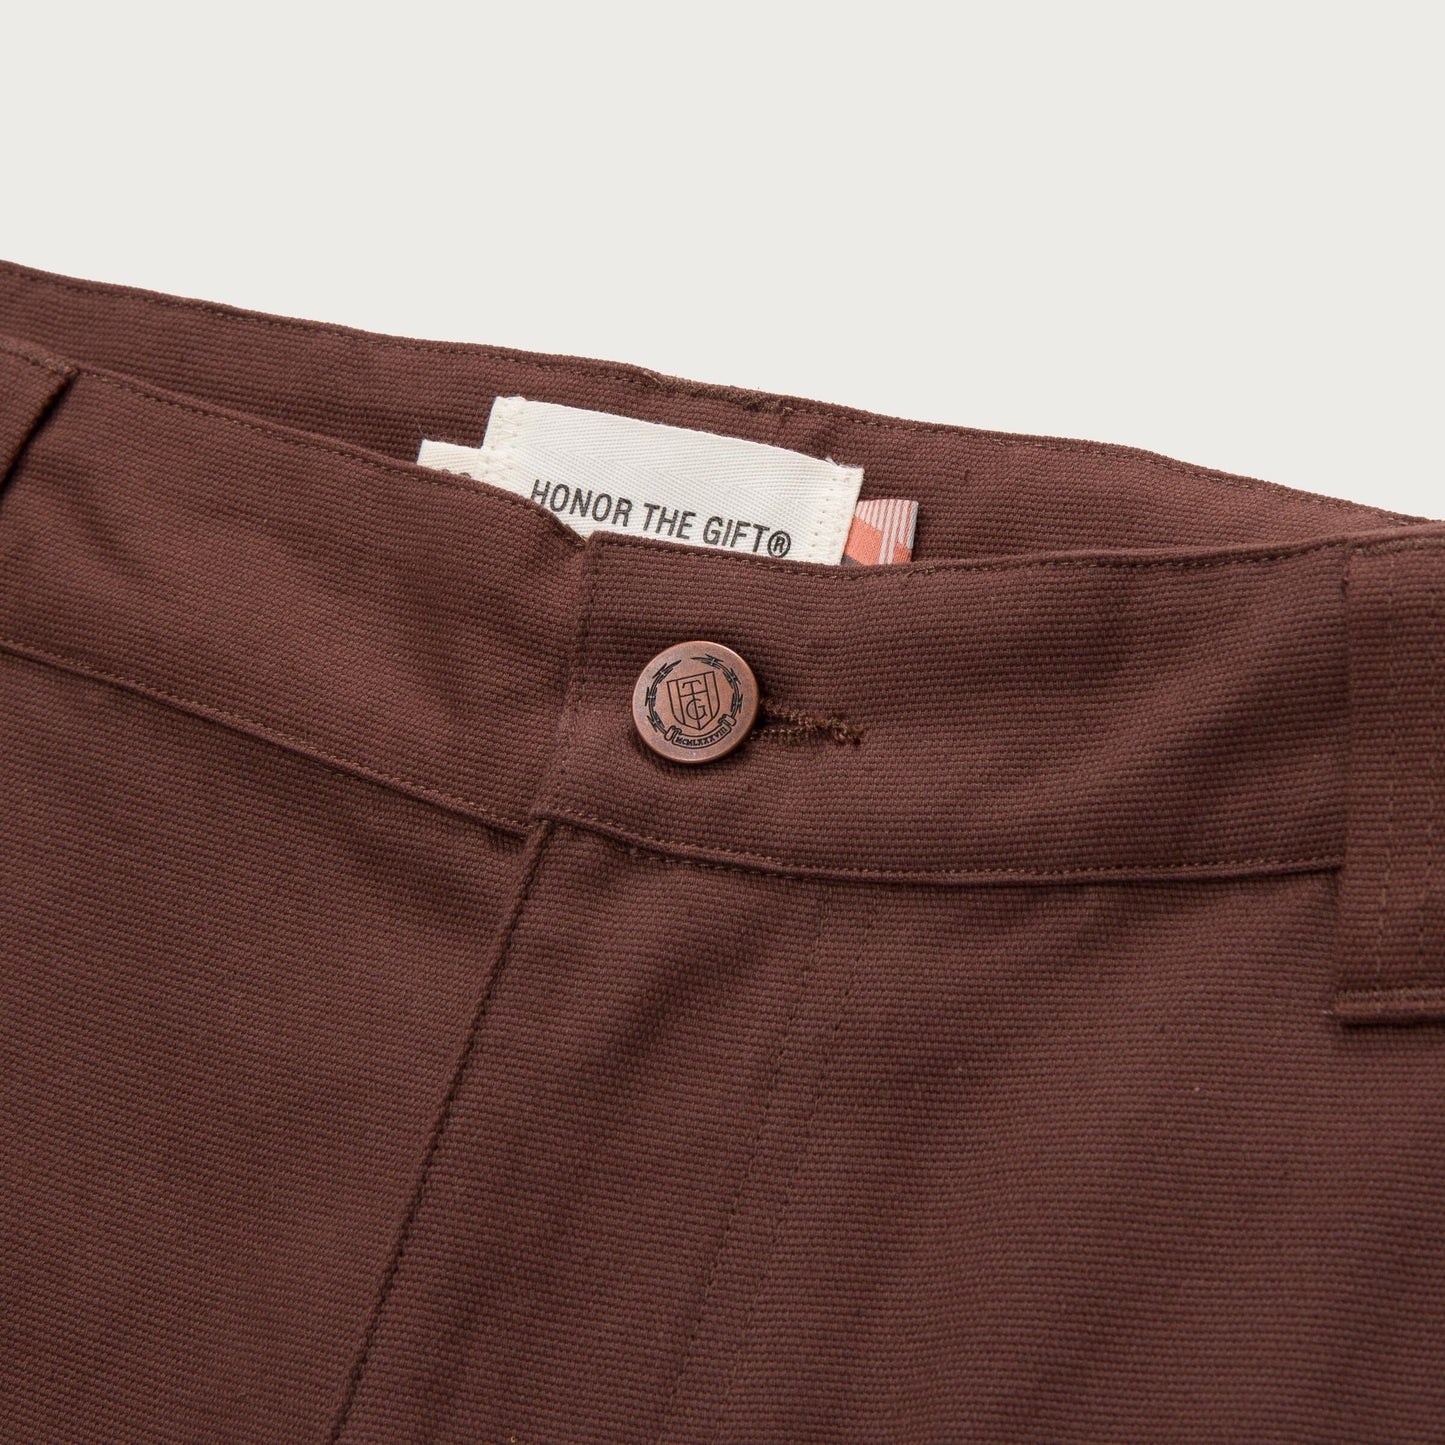 HTG PIPELINE ANKLE PANT- BROWN